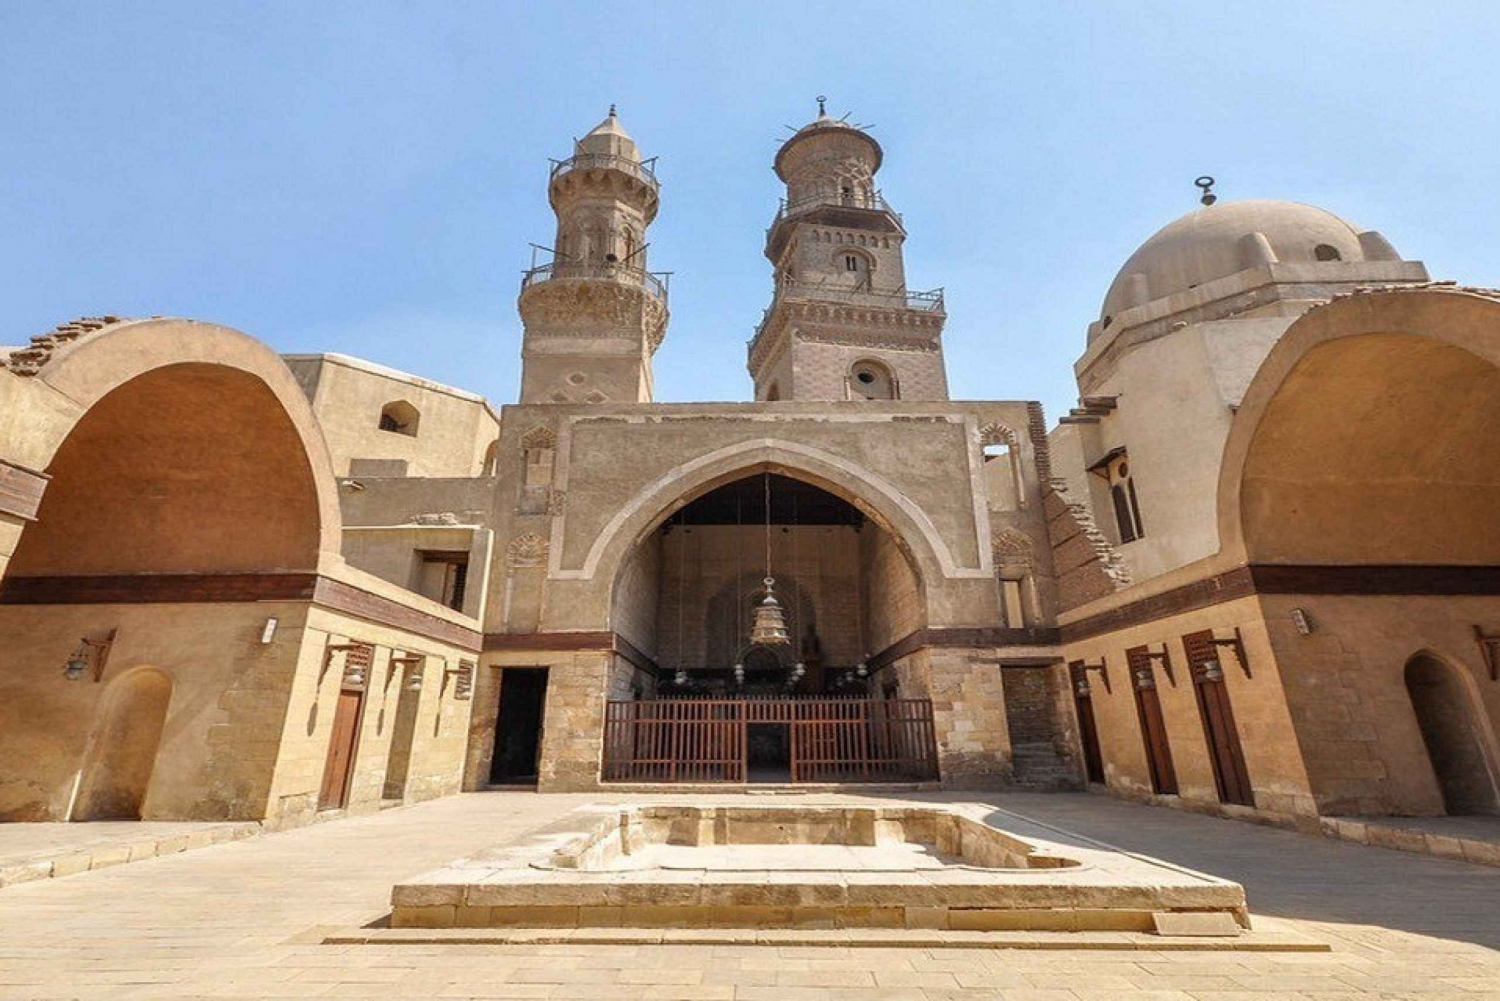 Cairo: Full-Day Islamic and Coptic Private Tour with Lunch